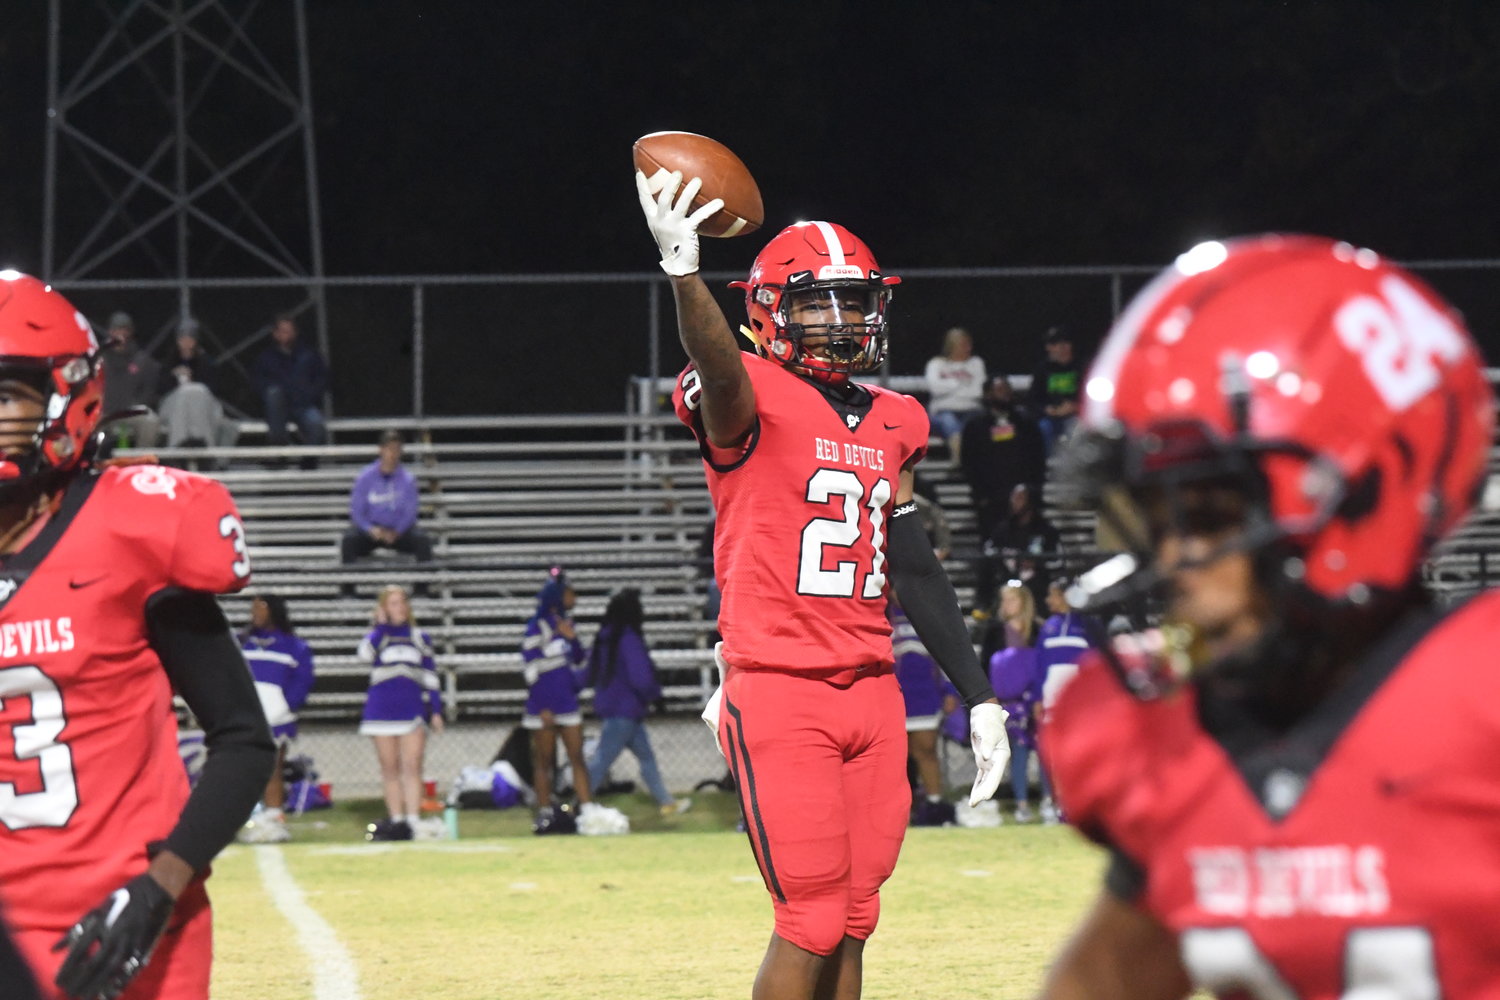 The win that gave Red Devil Football an undefeated season - The